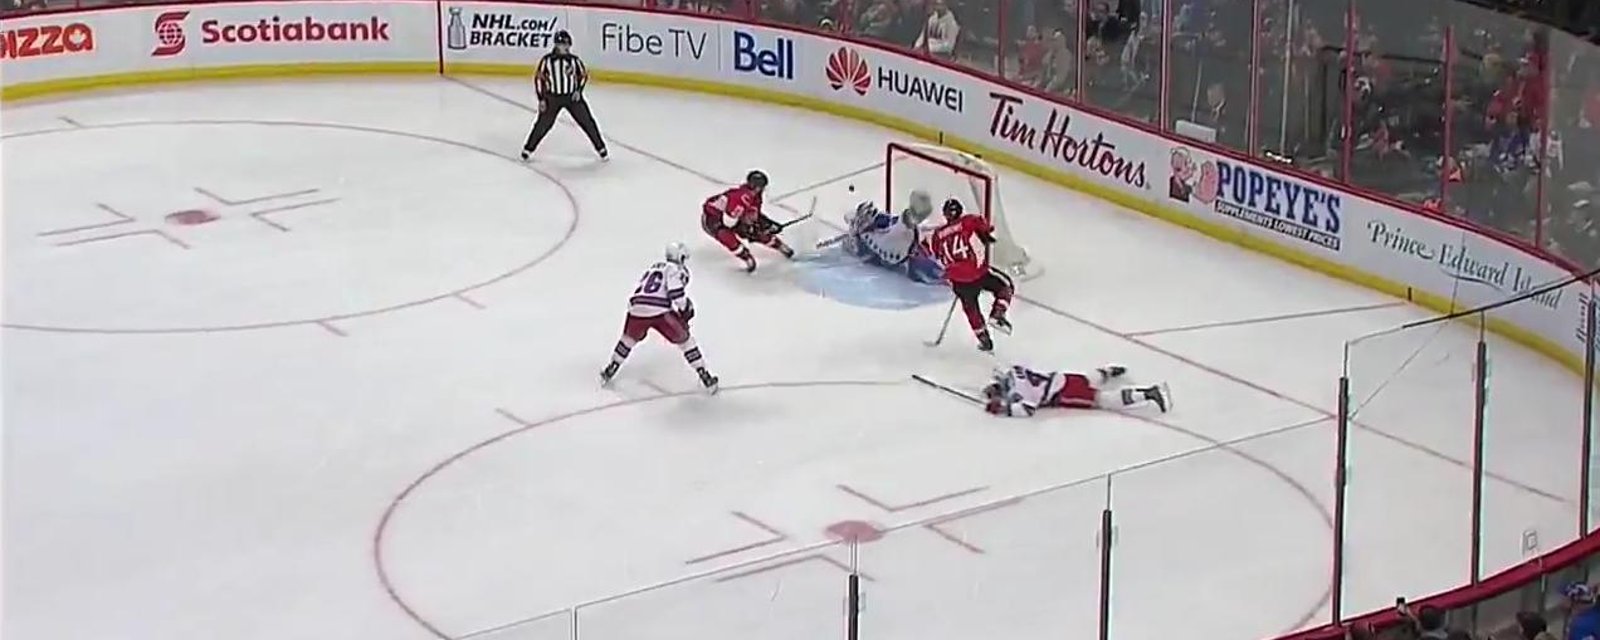 MUST SEE : Ridiculous pair of saves from Lundqvist, Anderson. 